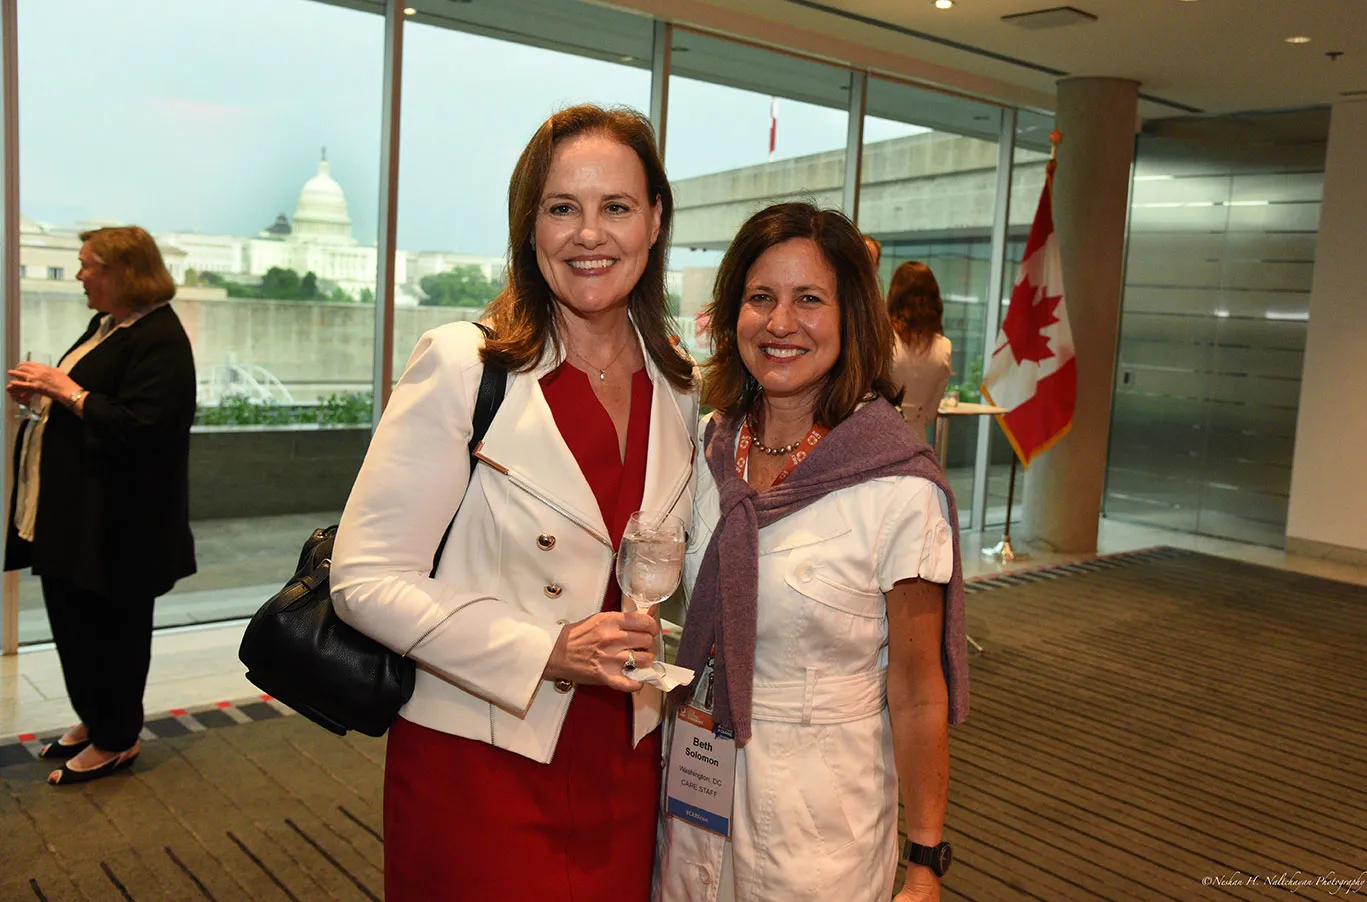 Michéle Flournoy enjoys a glass of water while standing next to Beth Solomon.